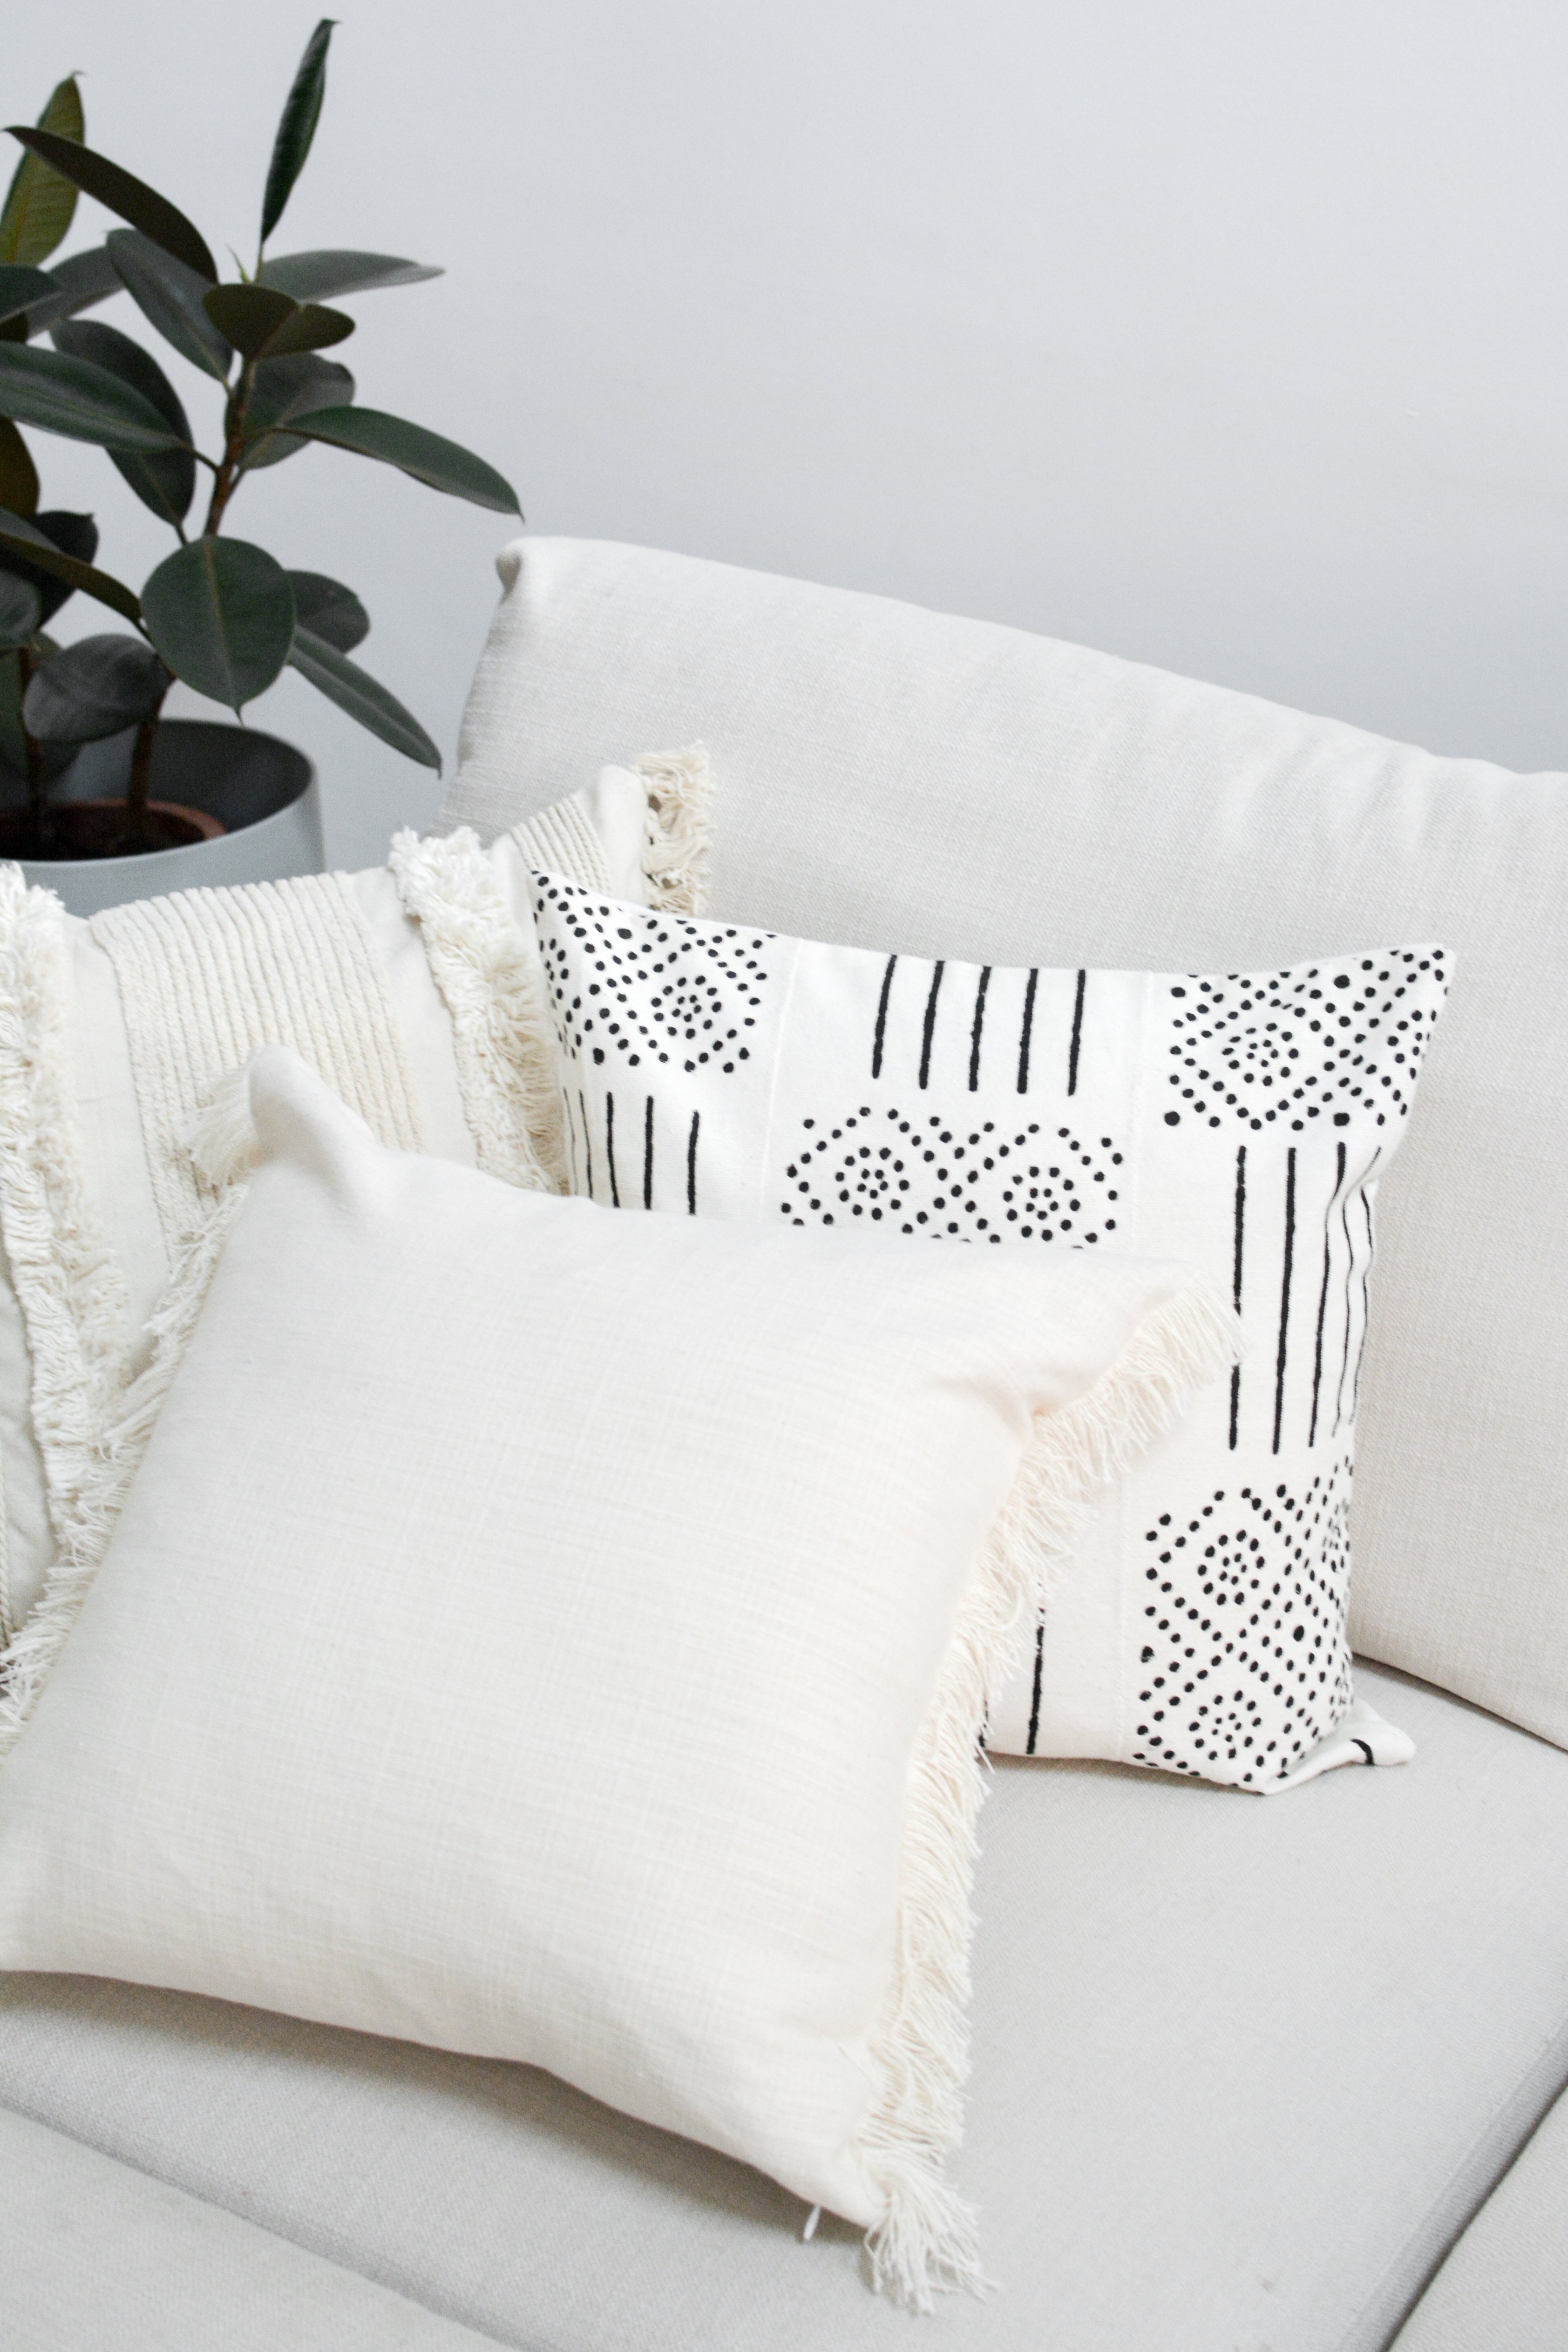 Colette Cushion Cover